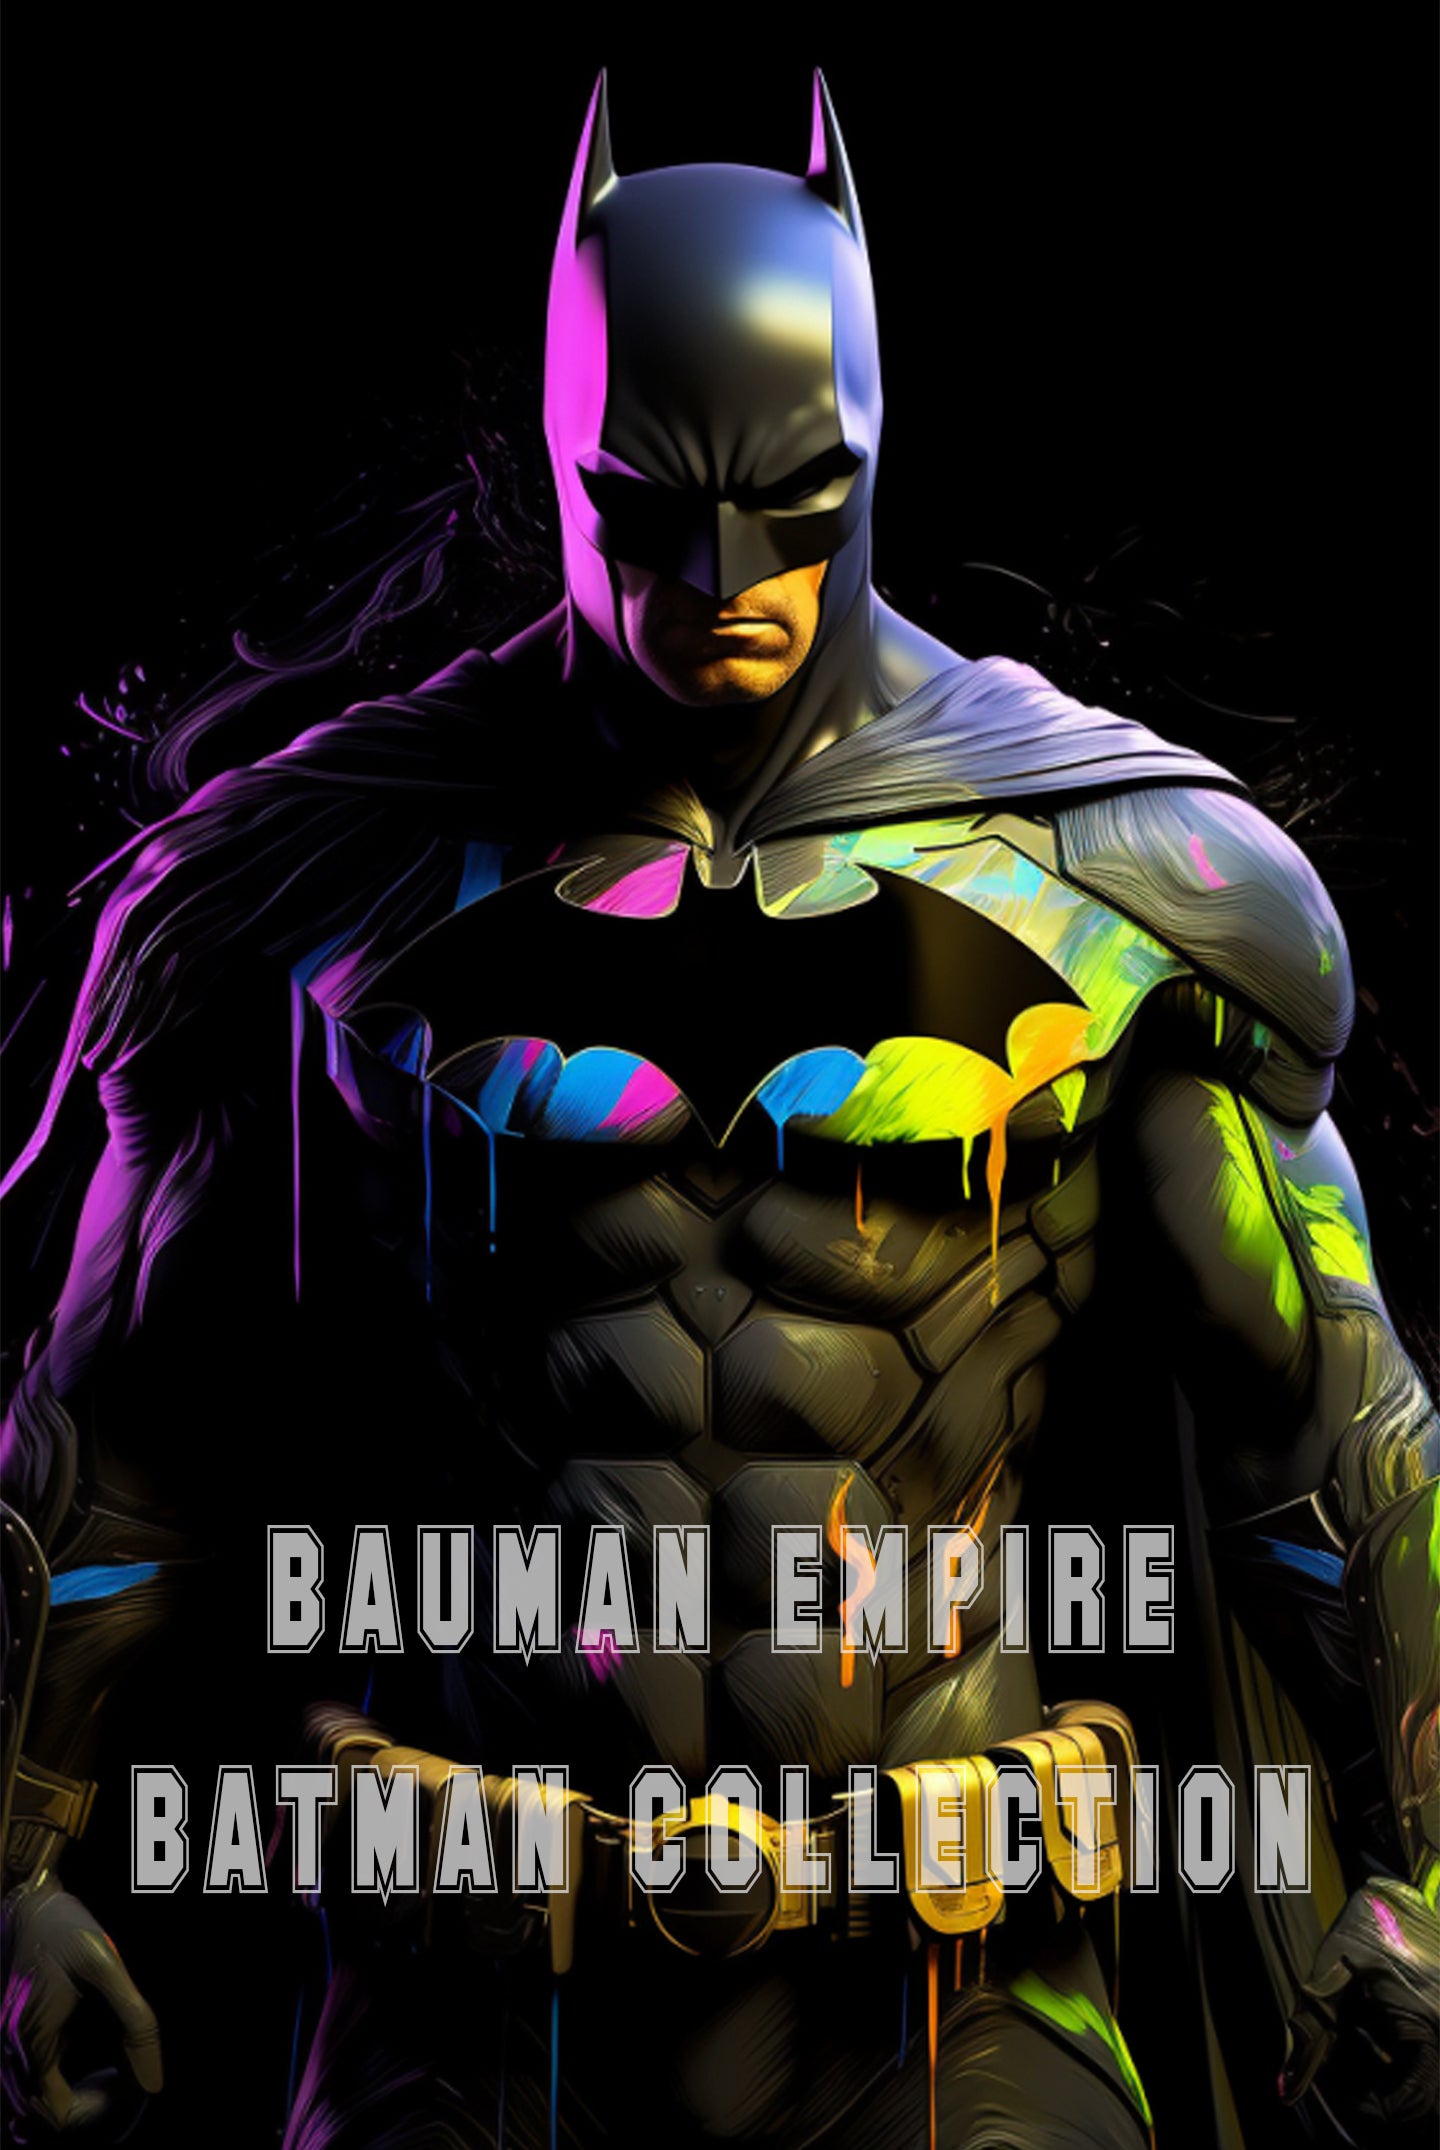 BAT MAN COLLECTION OF 9 POSTERS